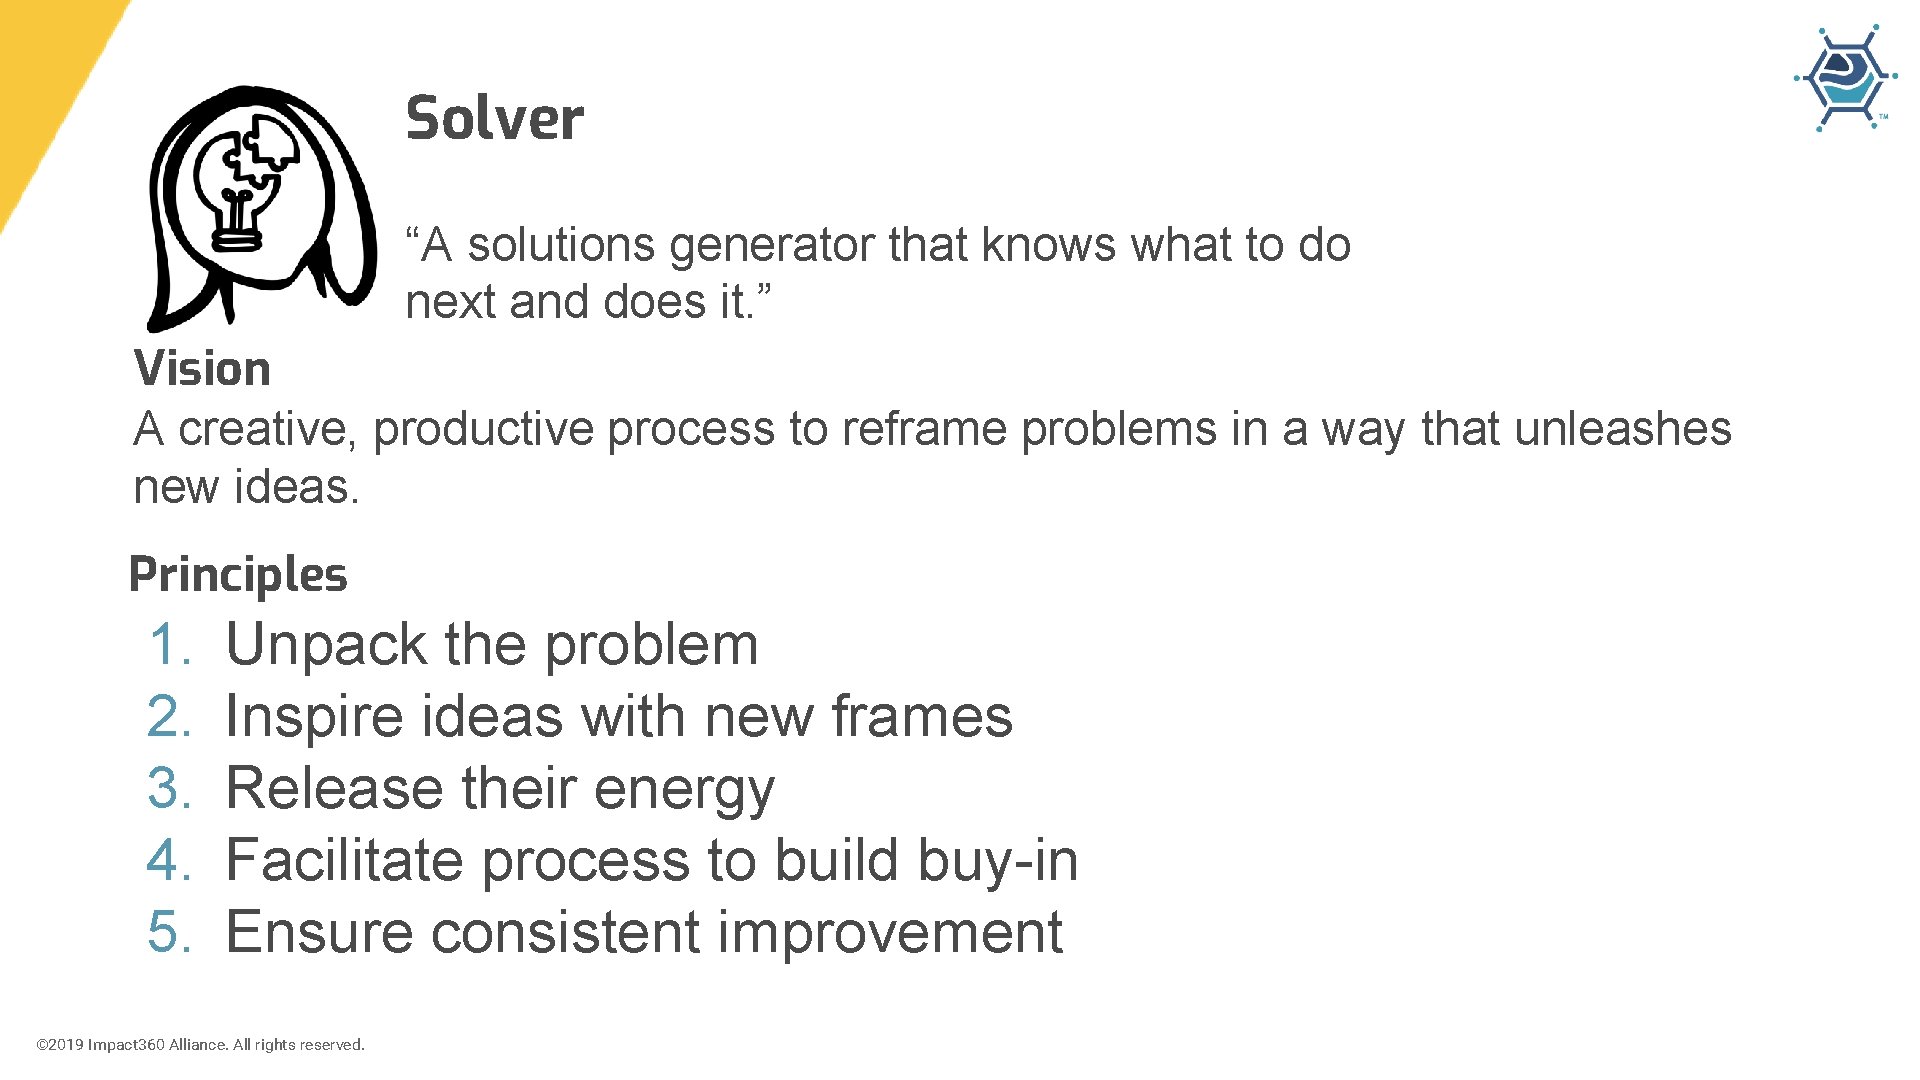 Solver “A solutions generator that knows what to do next and does it. ”